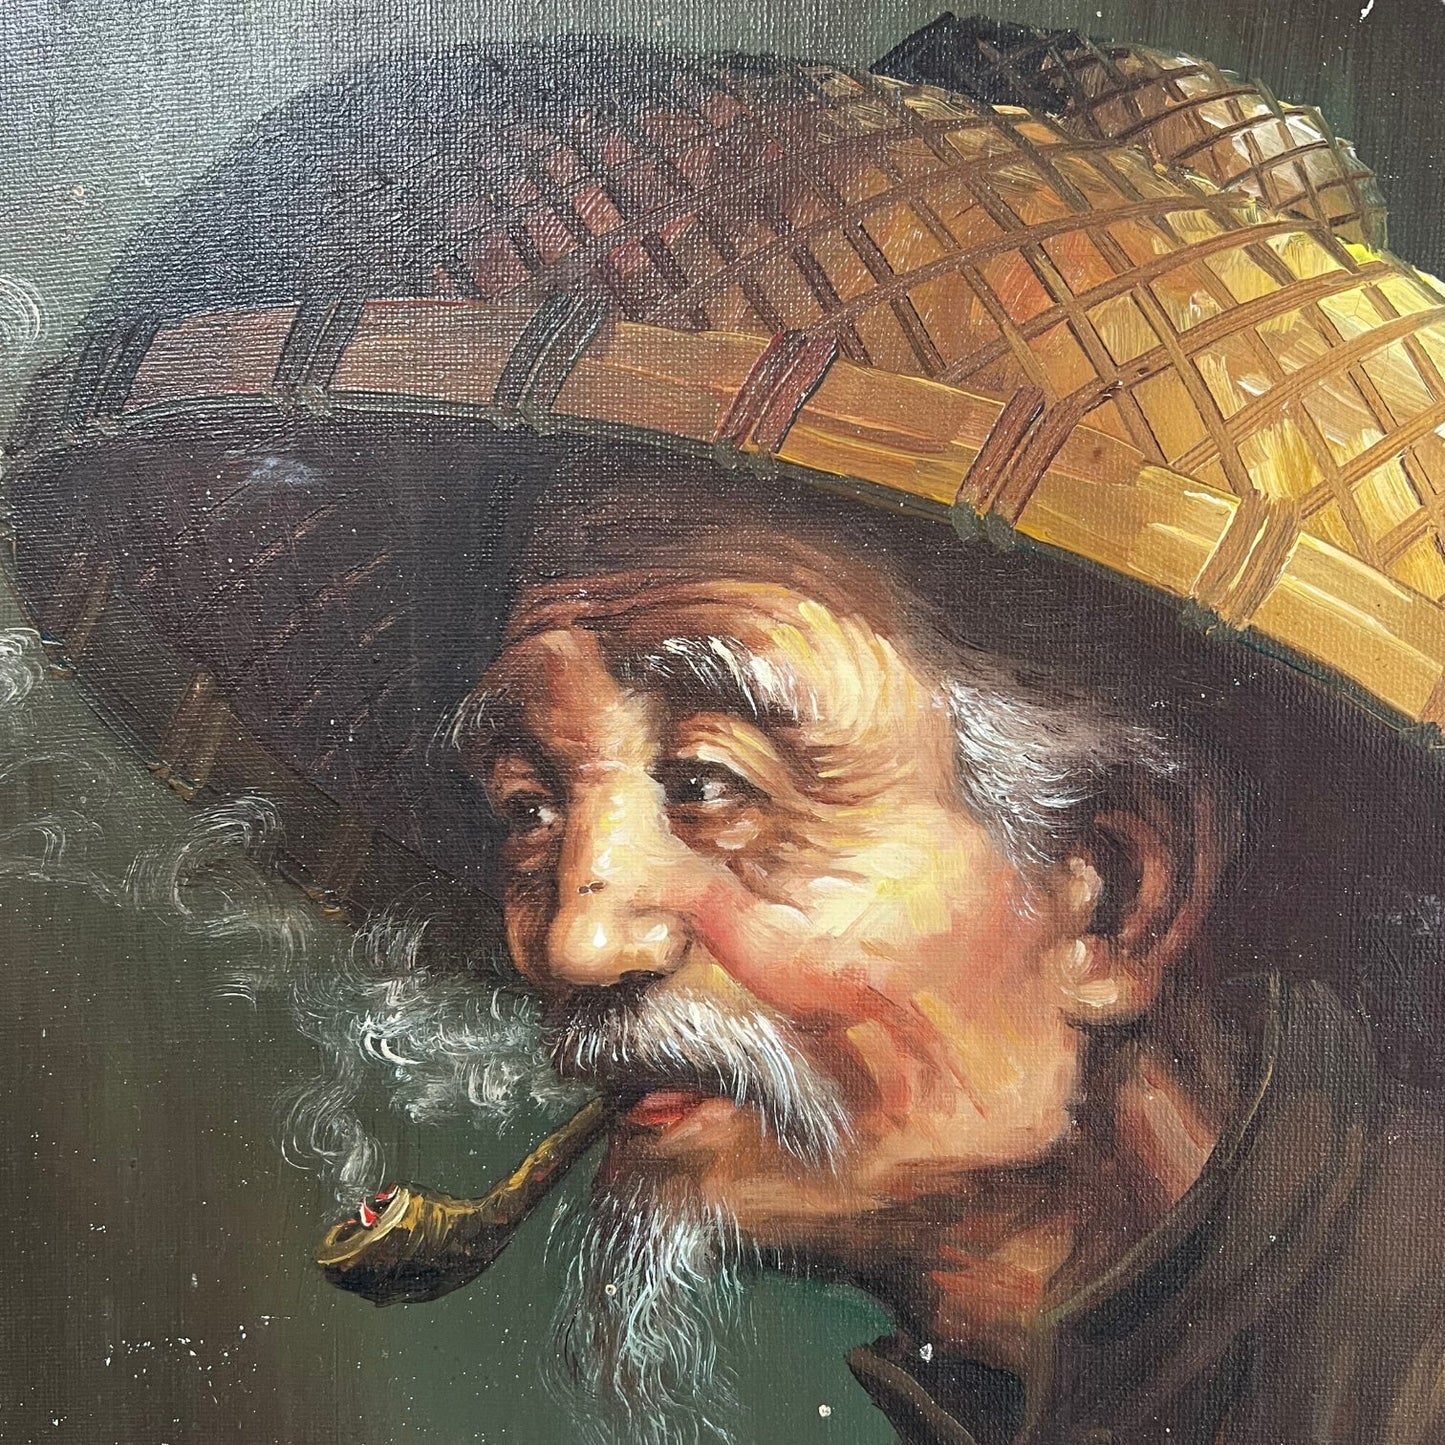 Vintage 1970's Chinese Man Smoking Pipe Oil on Canvas Framed / Signed